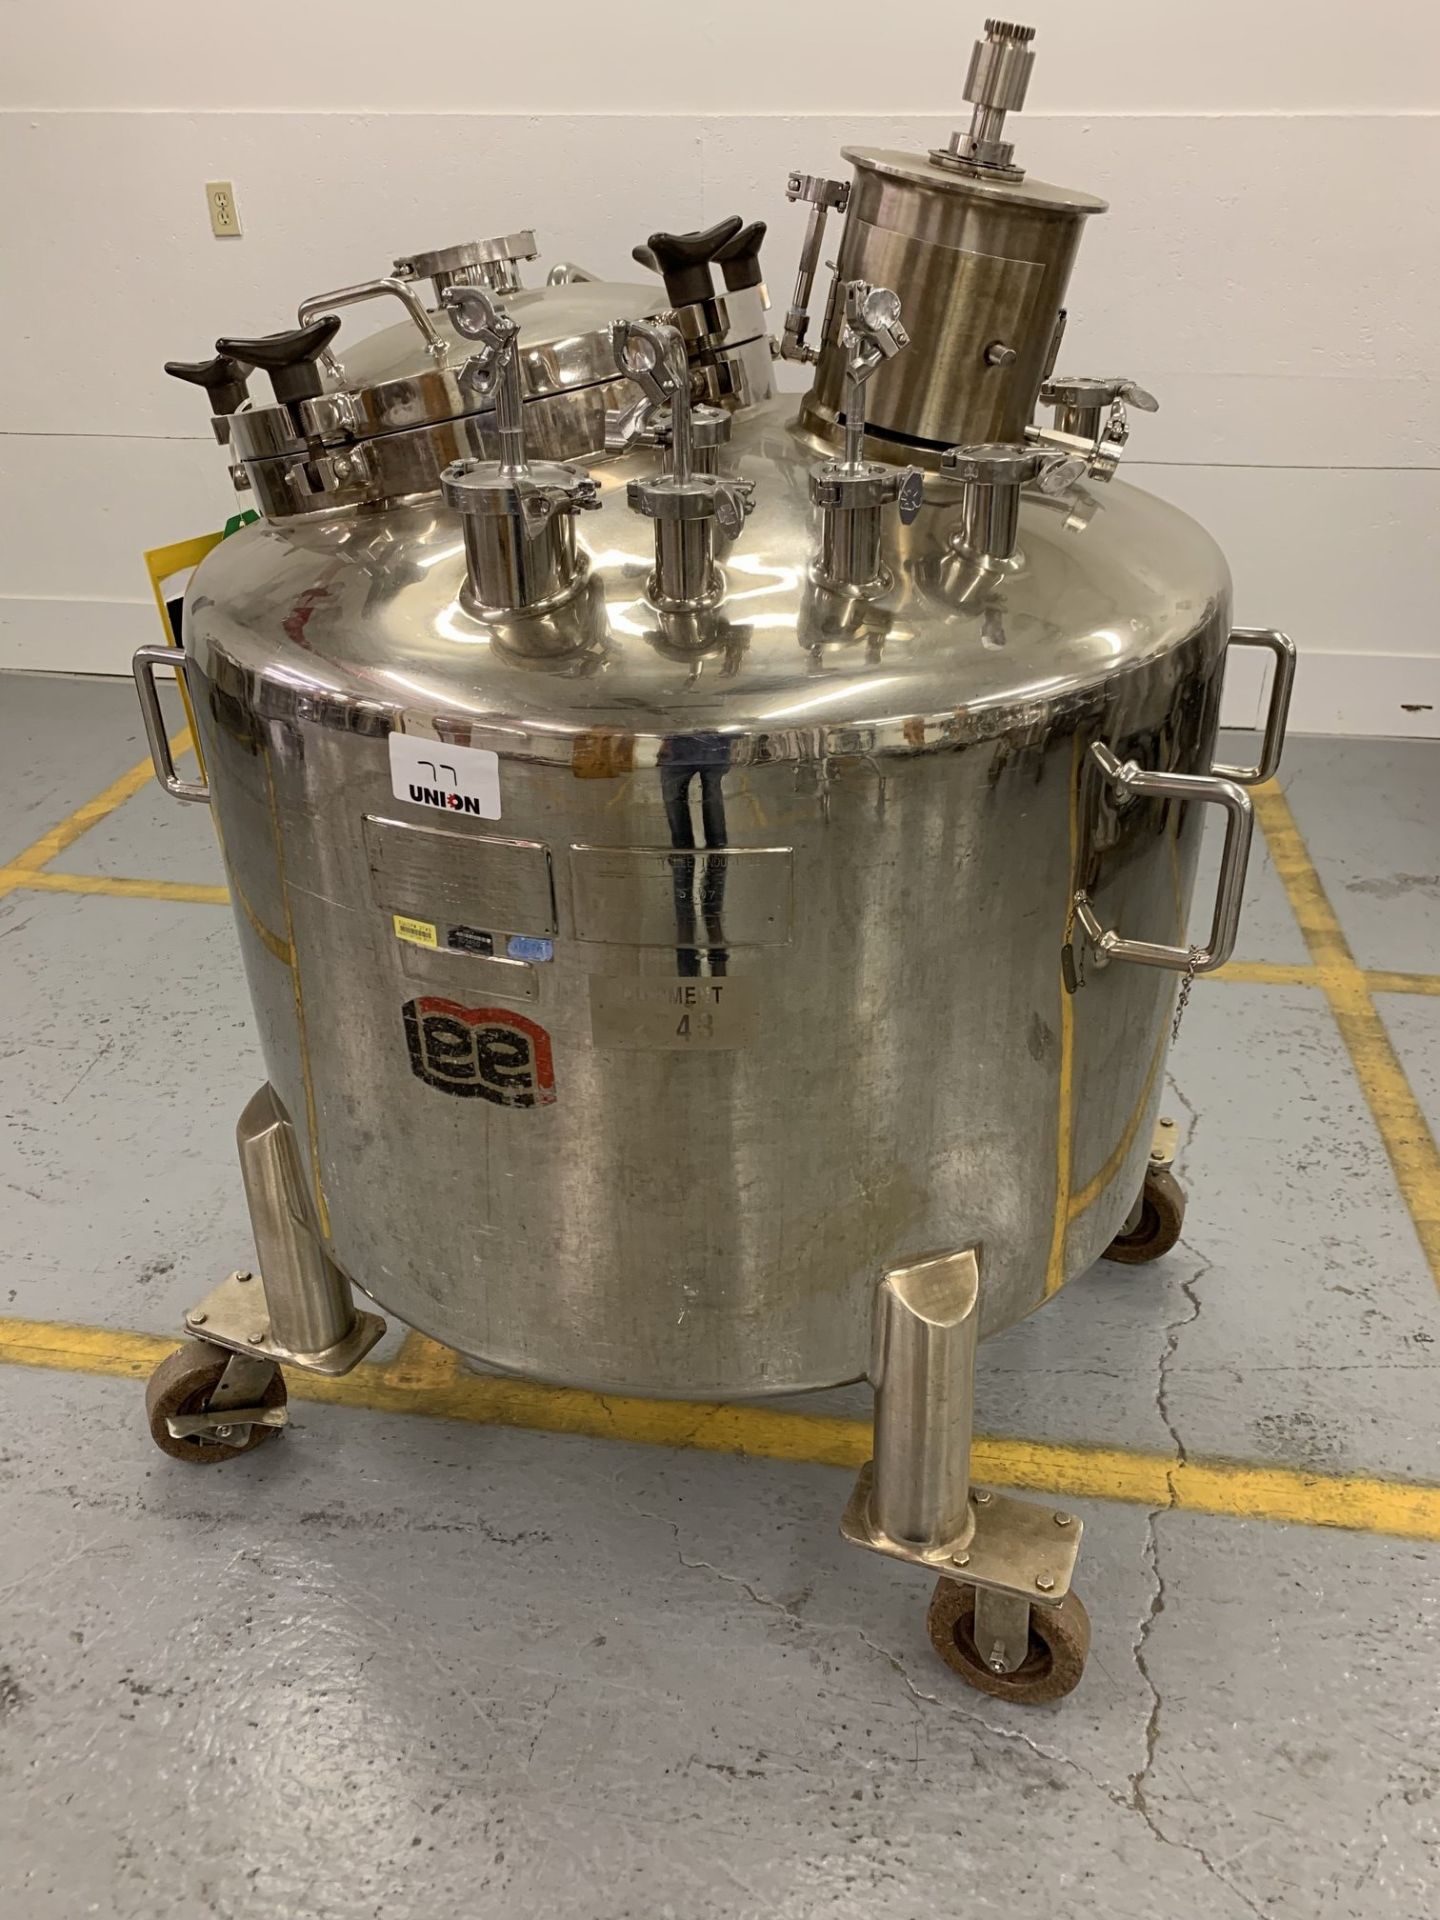 Lot # 77 - Lee Industries Vacuum Kettle, Stainless Steel, 500 Liter, Propellor agitator without